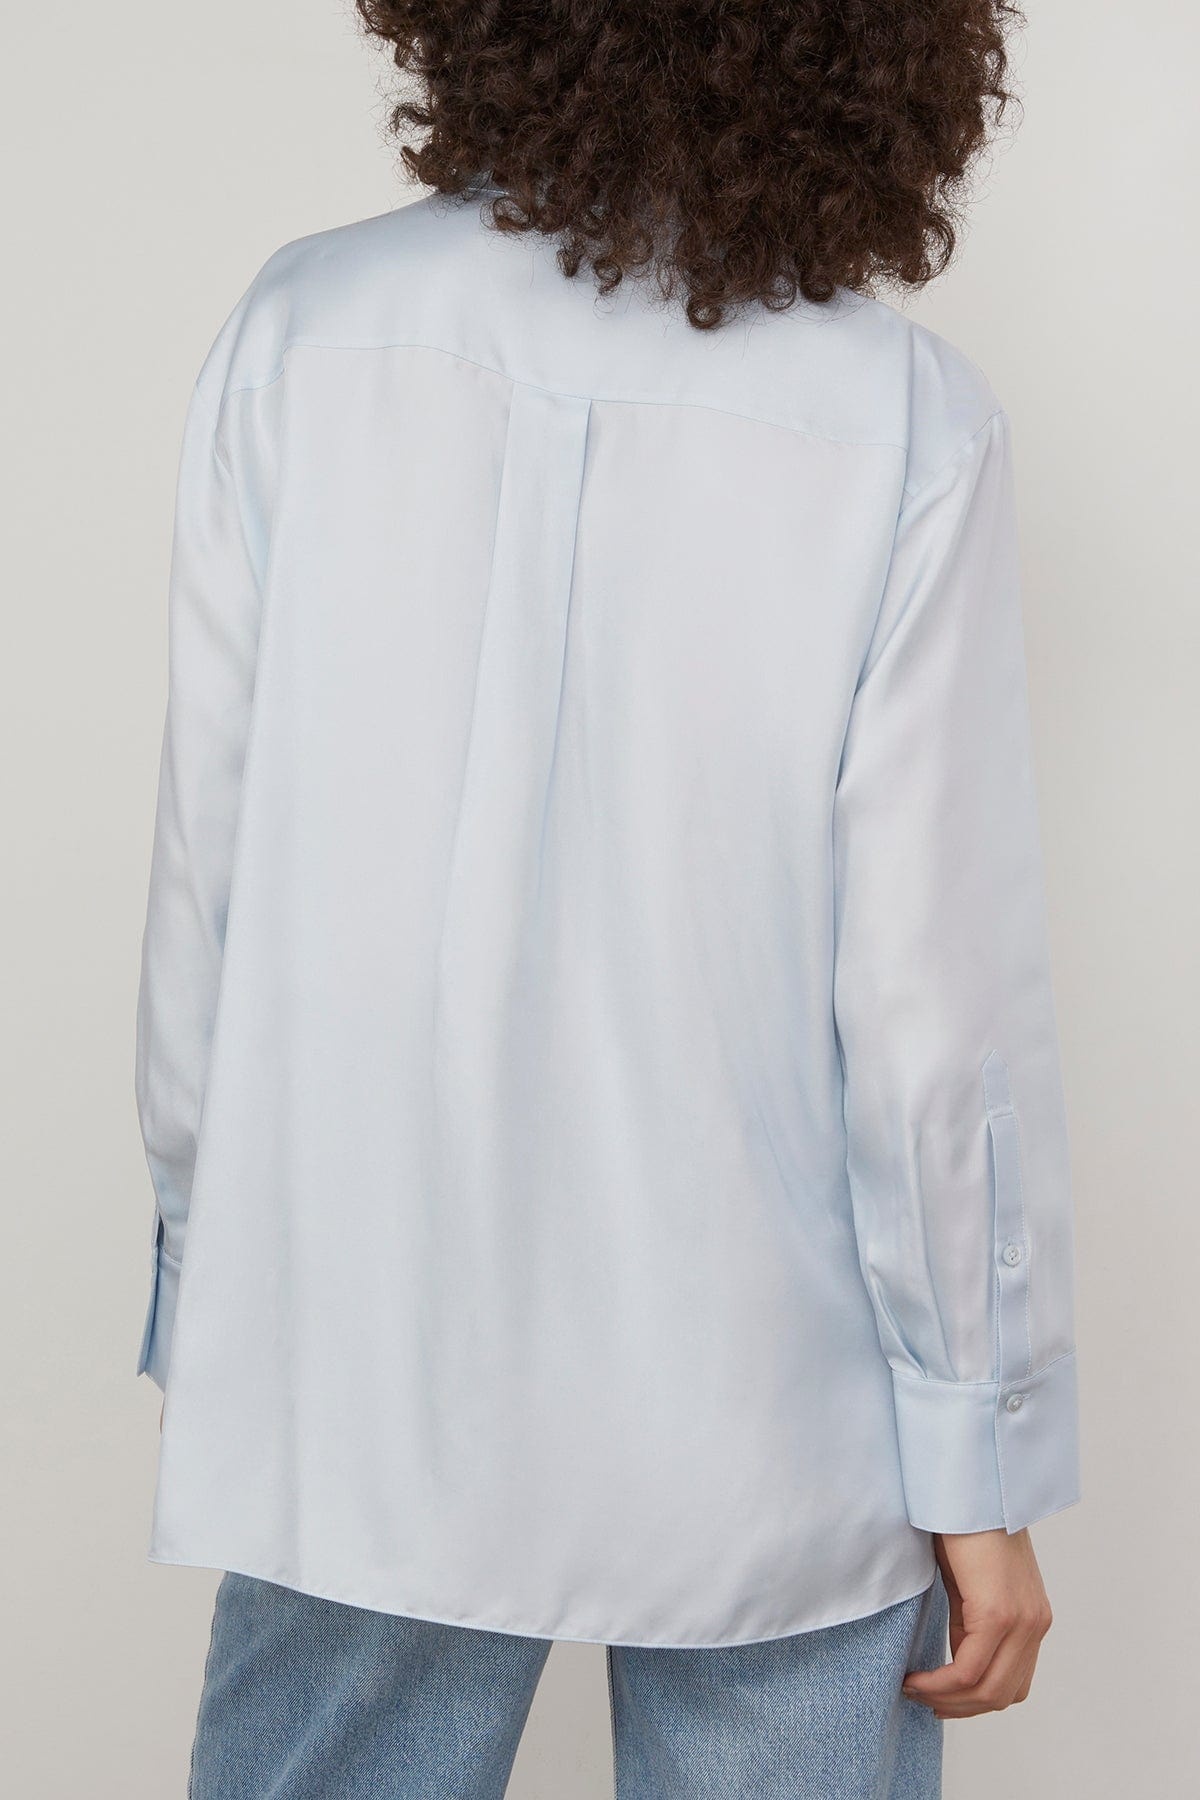 Sensual Coolness Blouse in Soft Blue - 4